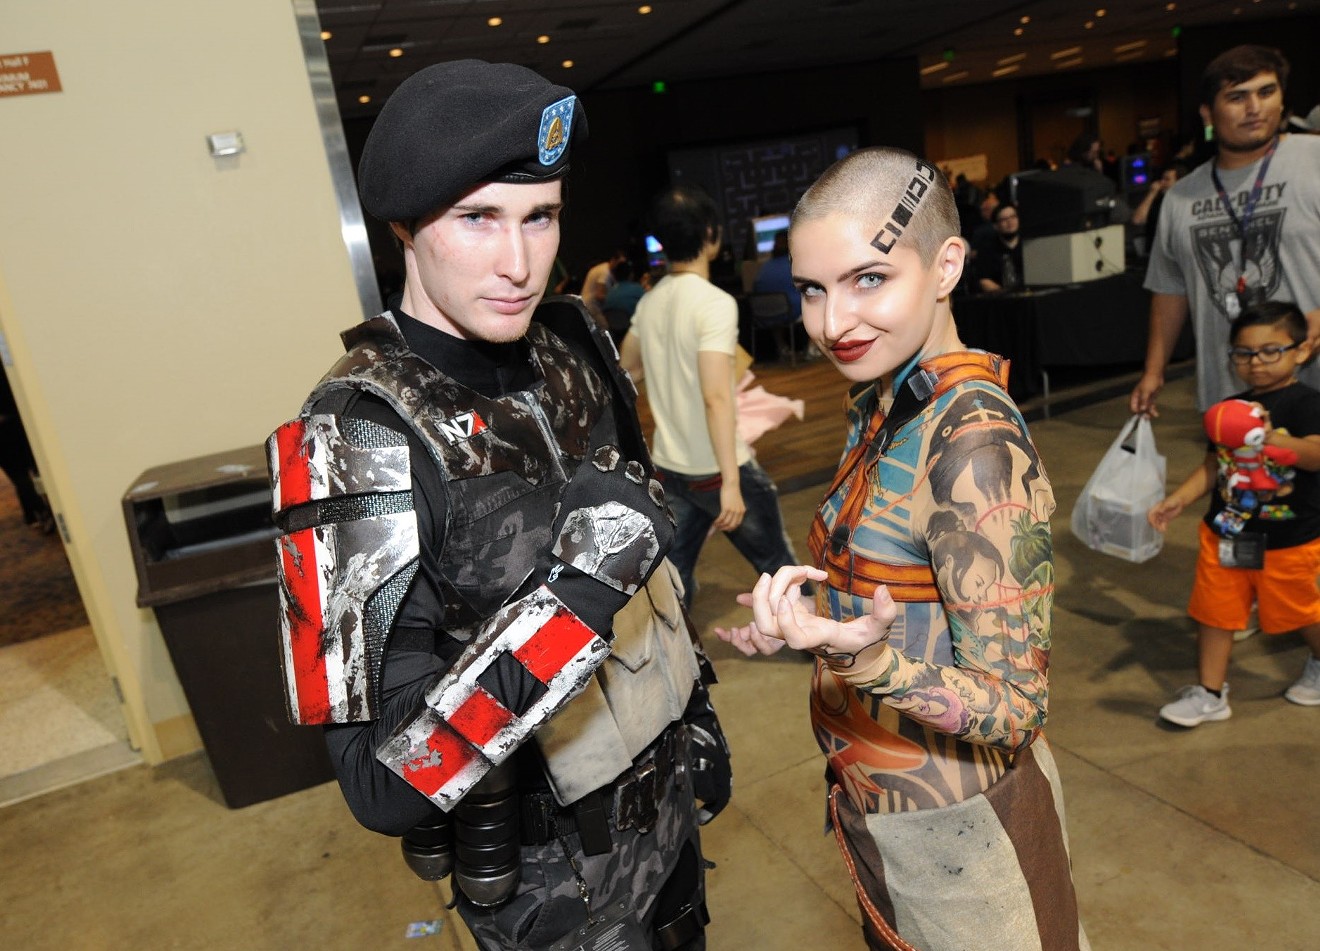 Mass Effect cosplayers at last year's Game On Expo.